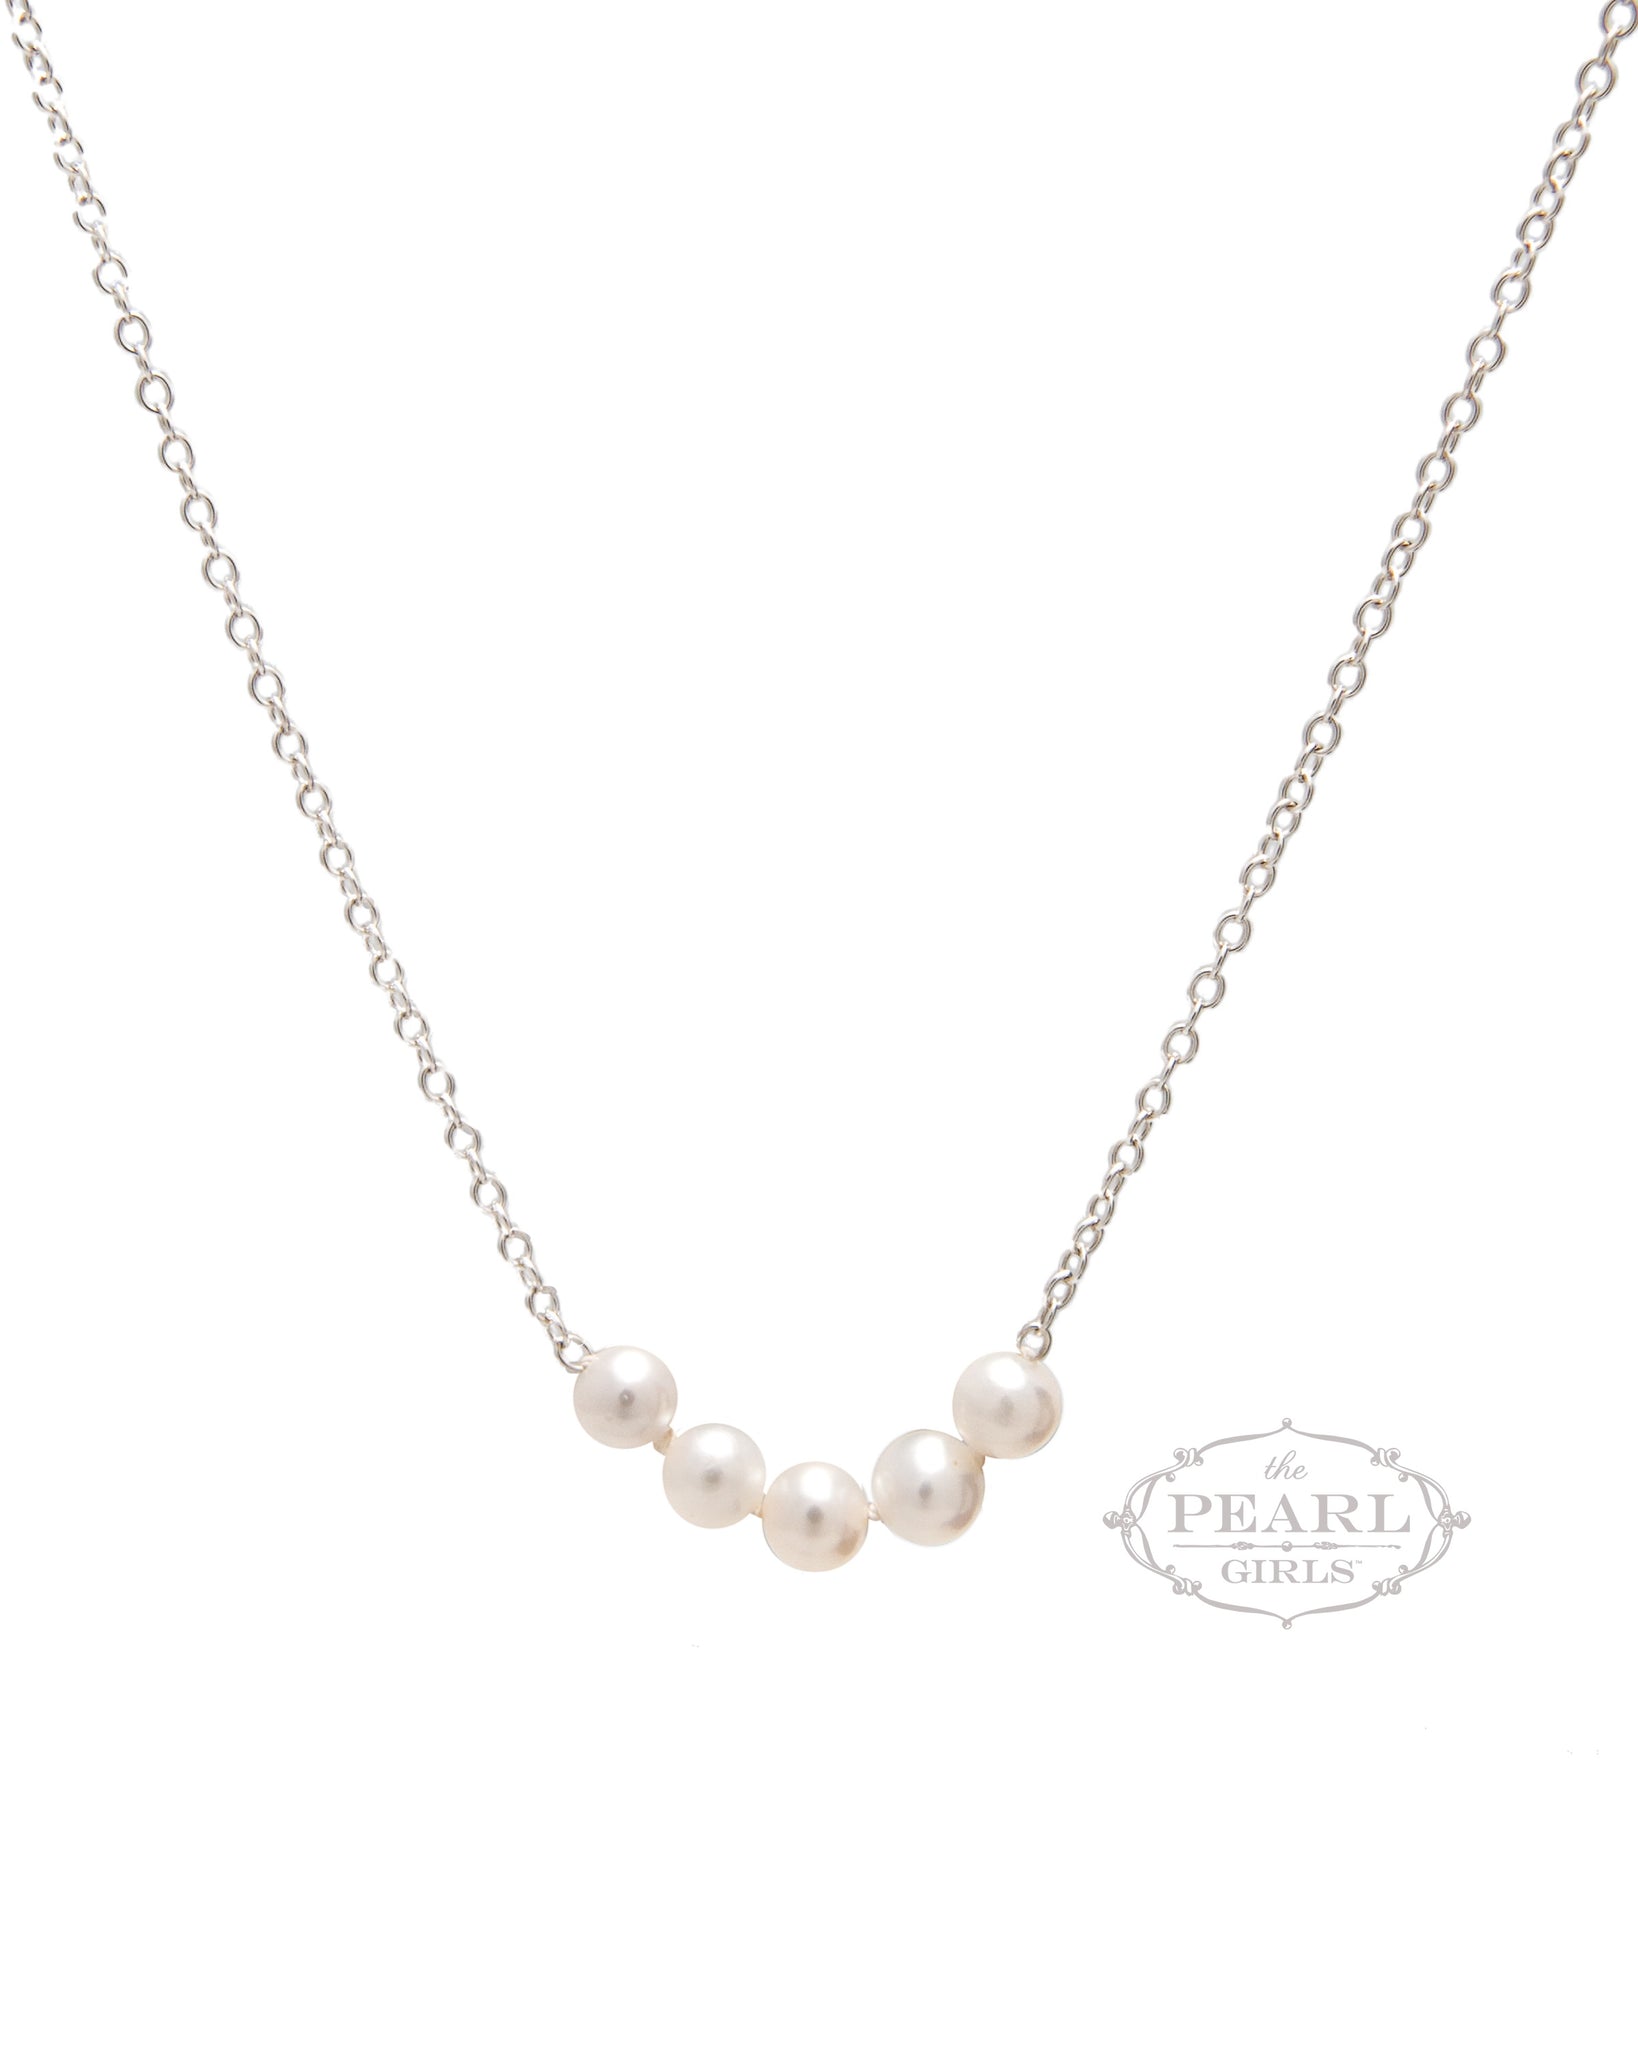 Count Your Blessings Pearl Necklace with Medium Pearls on Chain (18"-20" chain)